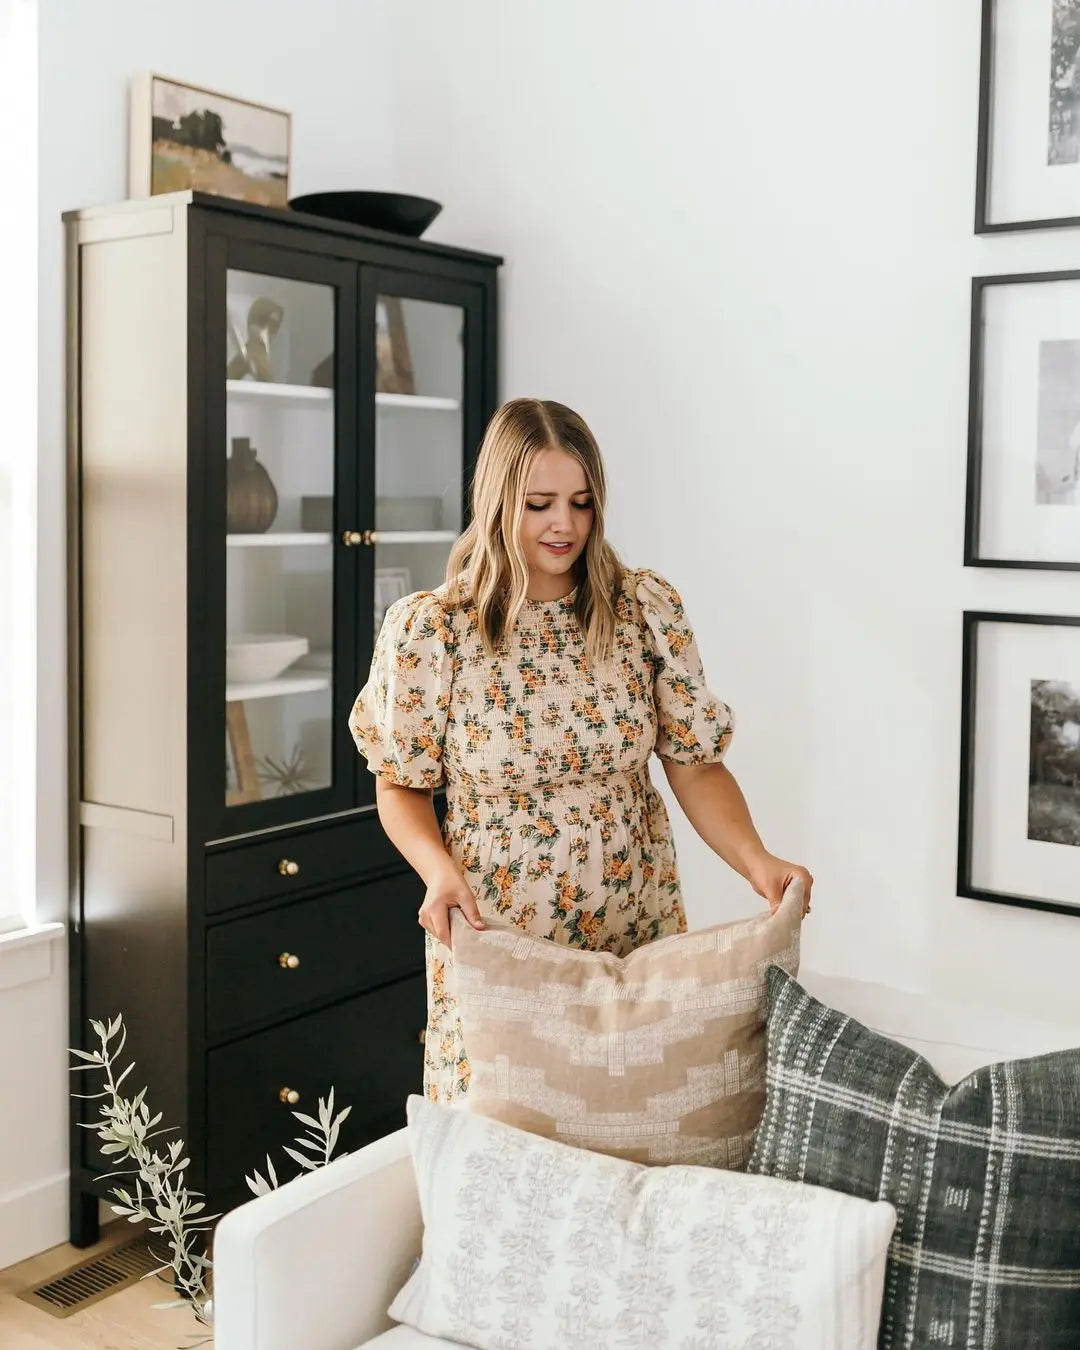 Decorating Your Home for Winter with Interior Designer Brittany of Canvas House Design